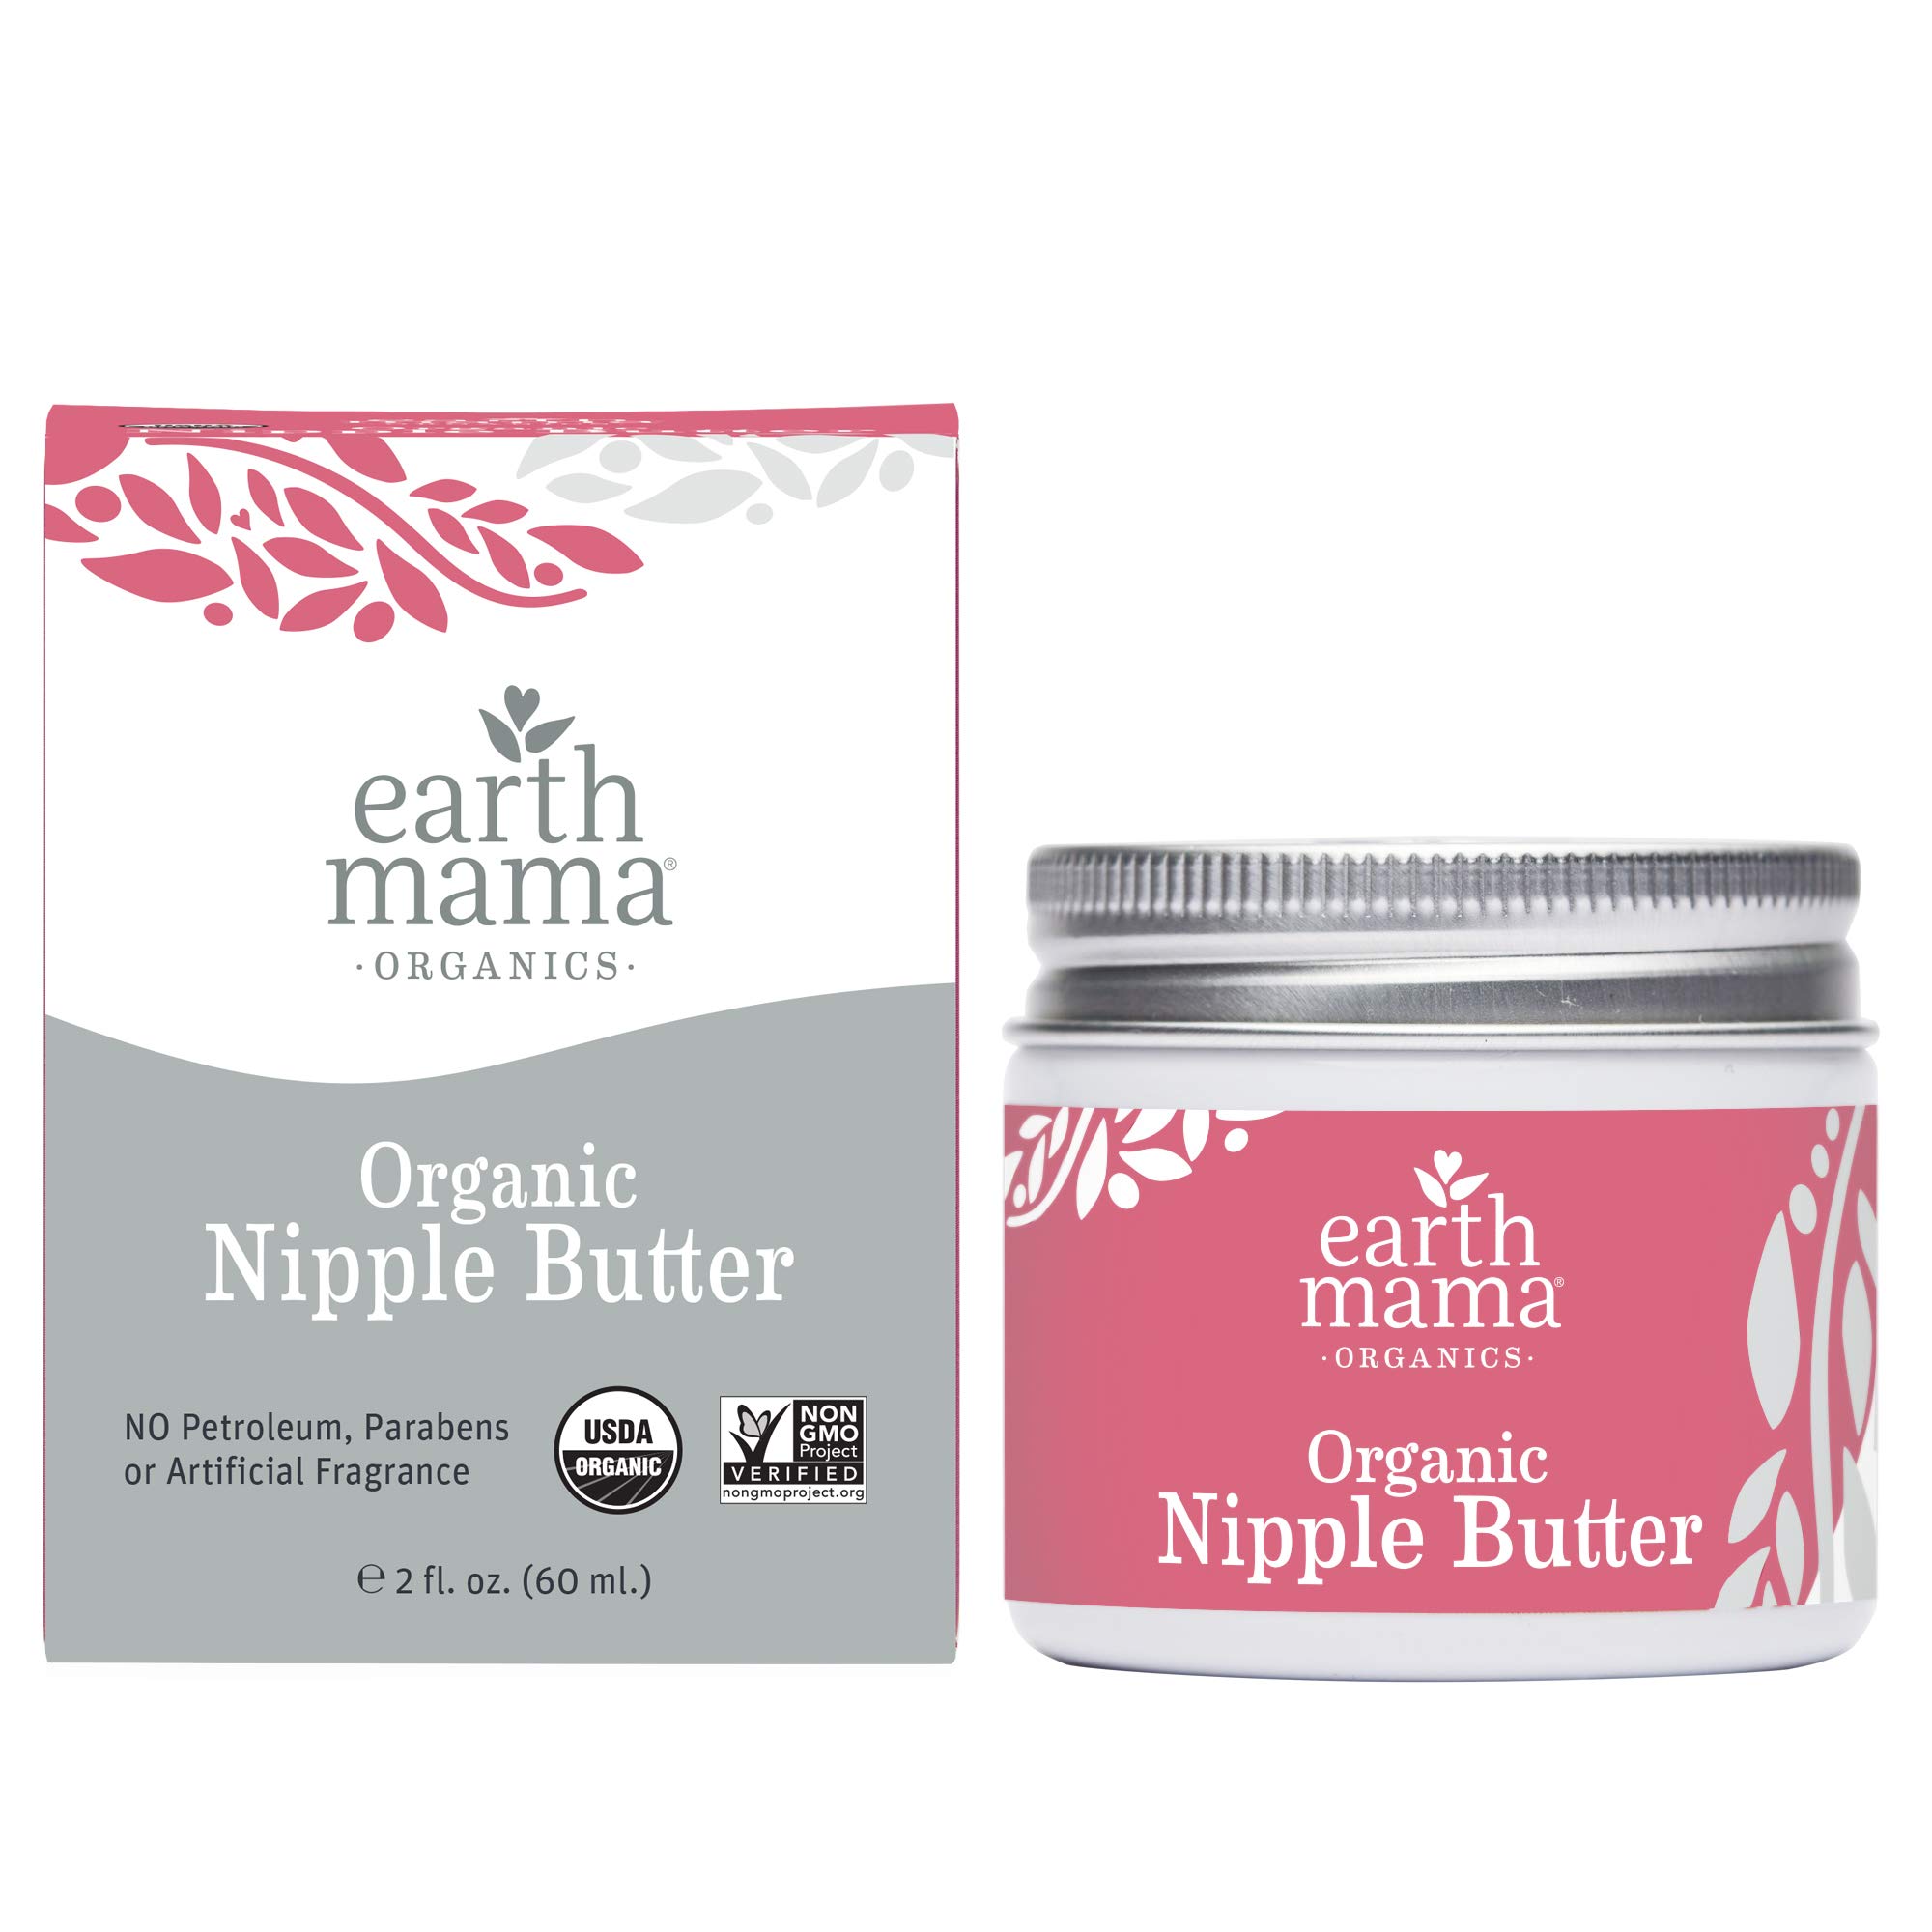 Organic Nipple Butter Breastfeeding Cream by Earth Mama | Lanolin-free, Safe for Nursing & Dry Skin, Non-GMO Project Verified, 2-Fluid Ounce $5.48